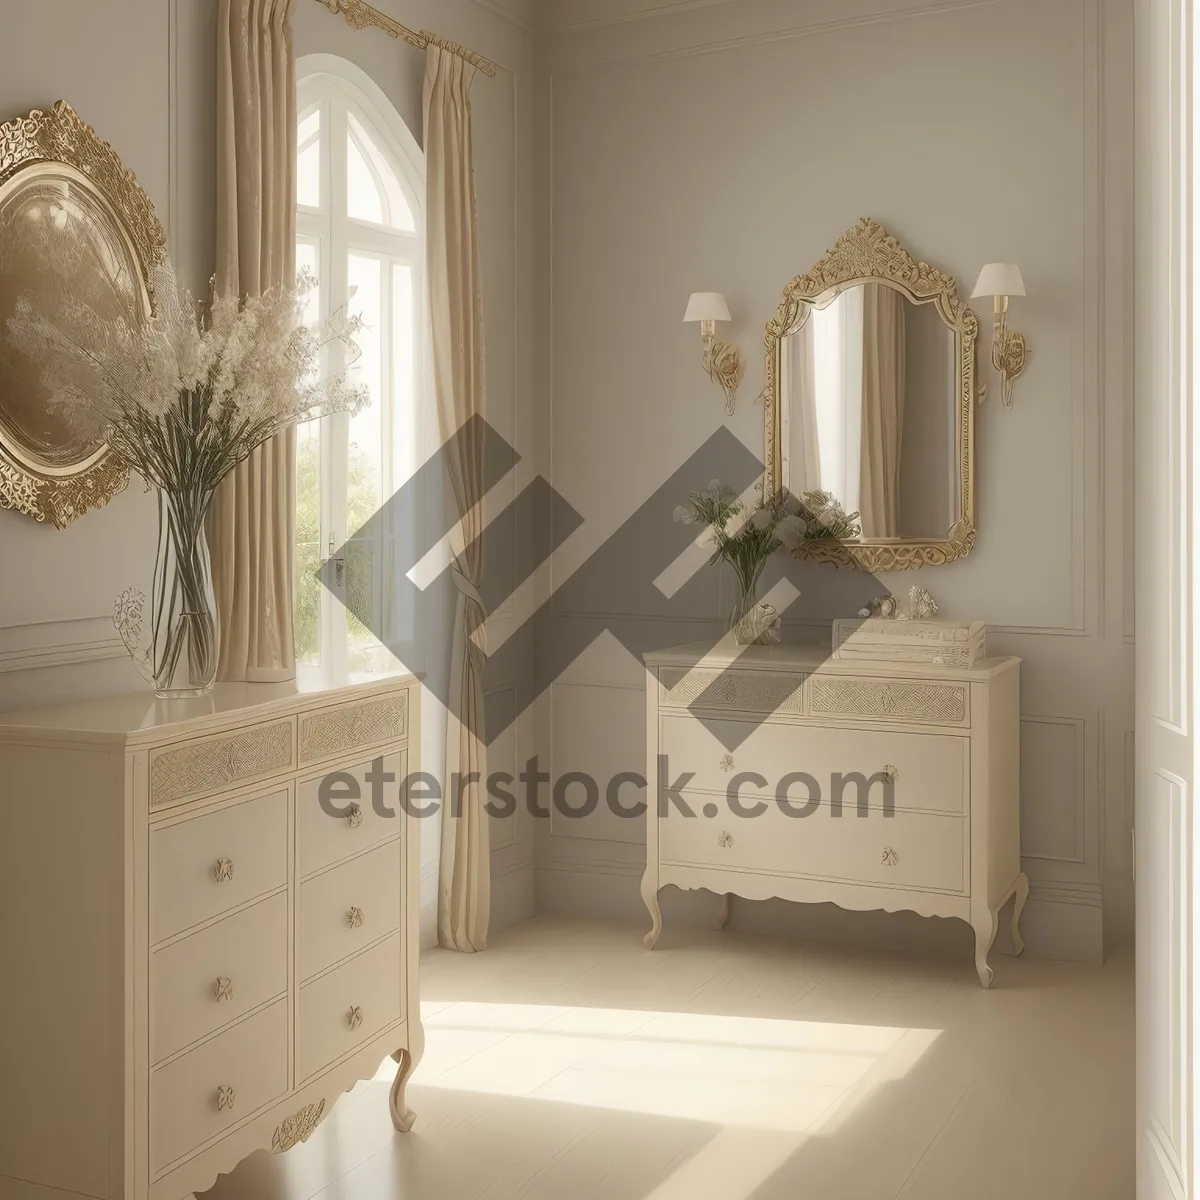 Picture of Modern luxury bedroom with wood furnishings and chic decor